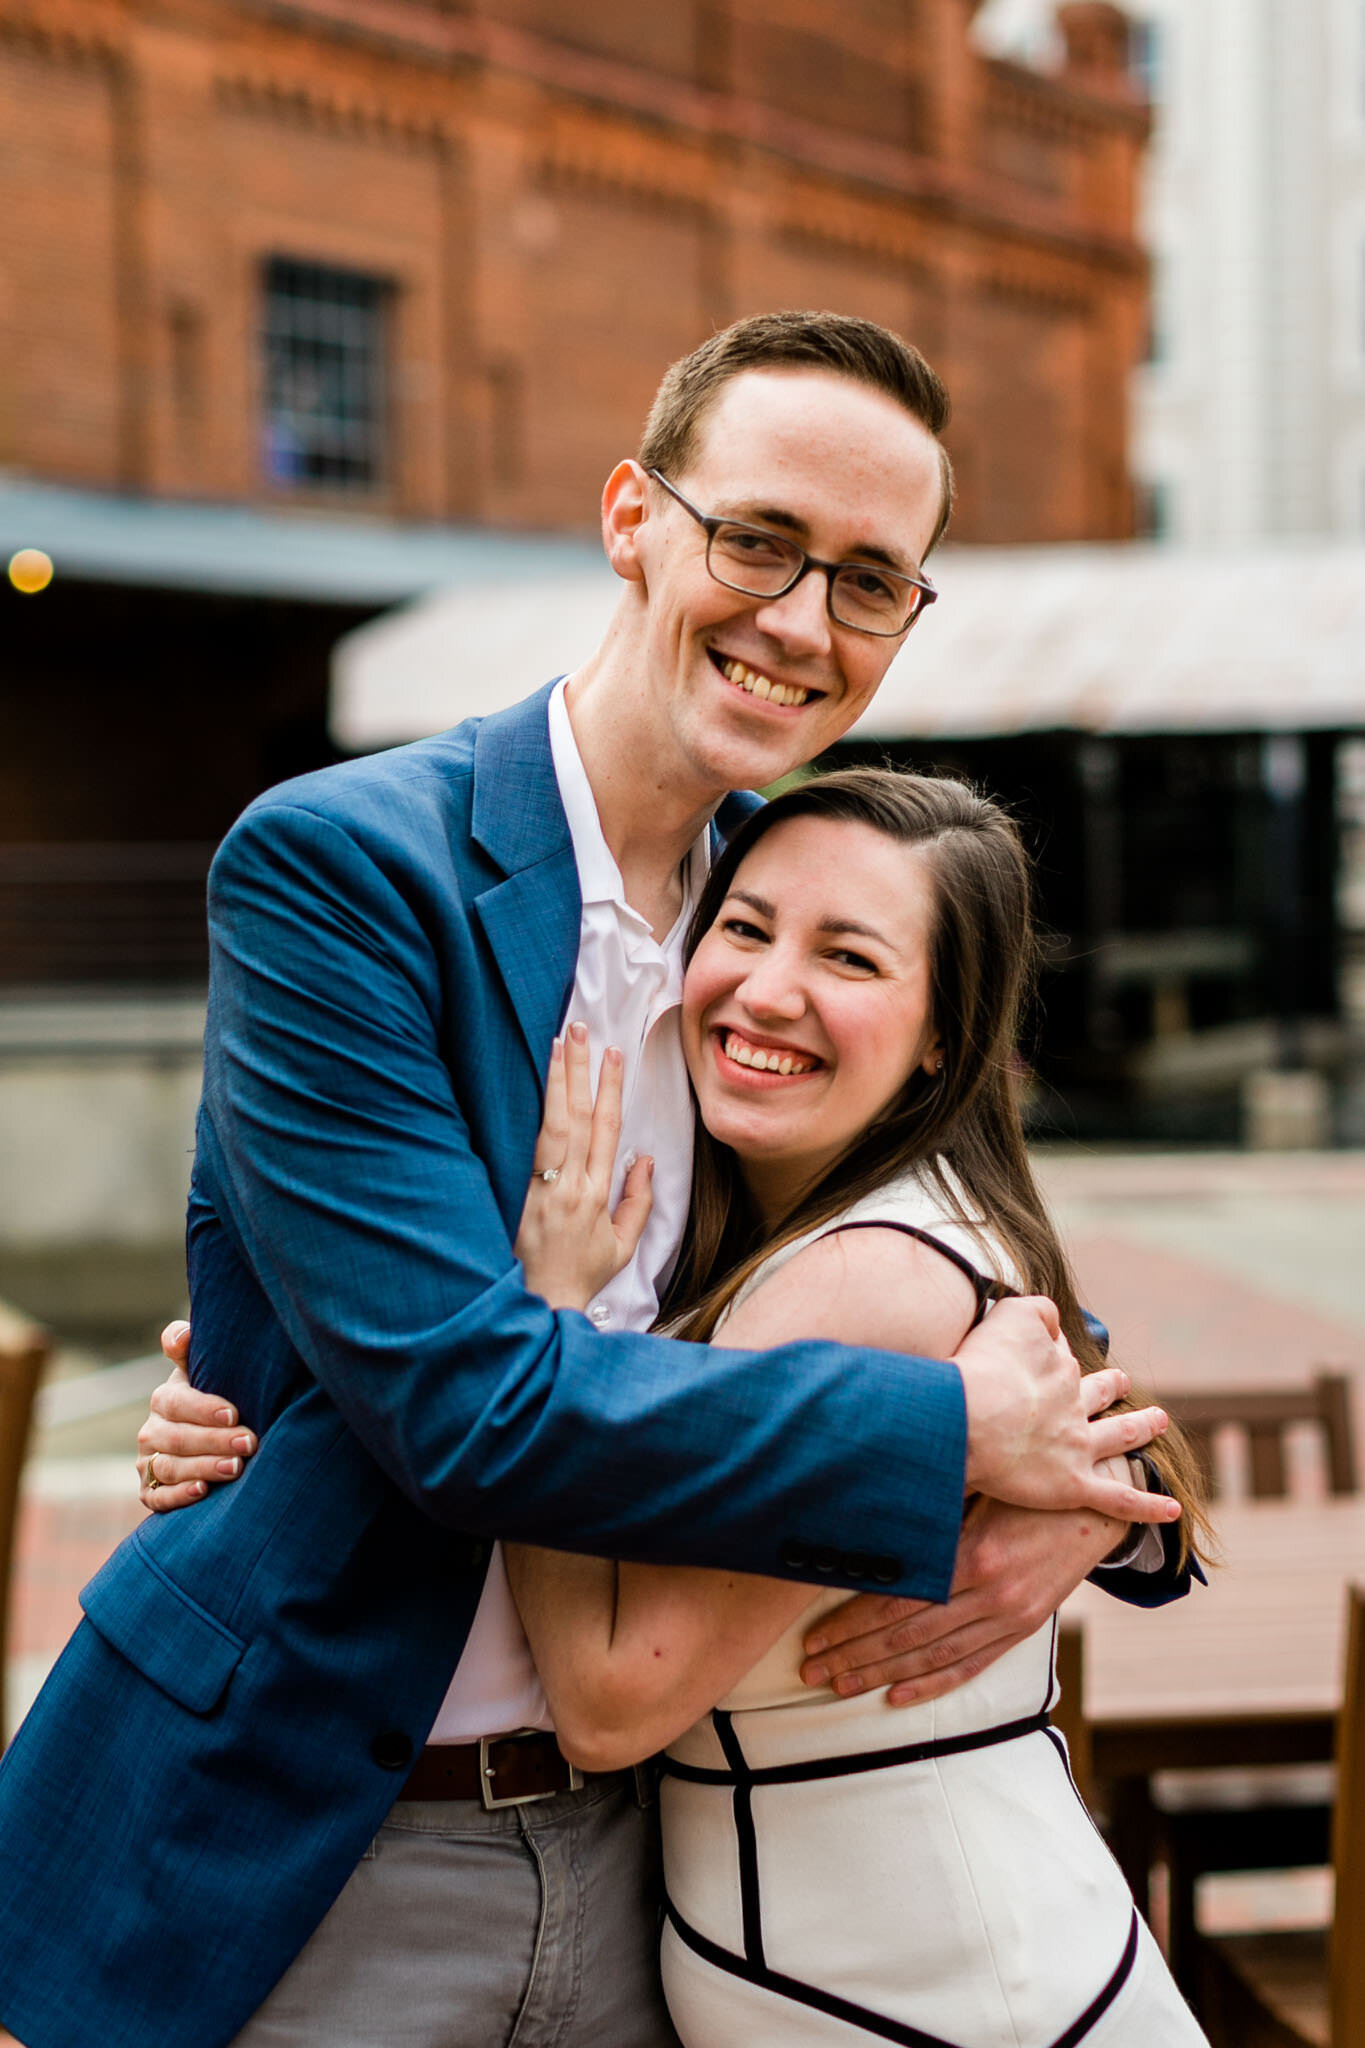 Durham Engagement Photographer | By G. Lin Photography | Couple hugging one another after surprise proposal at American Tobacco Campus